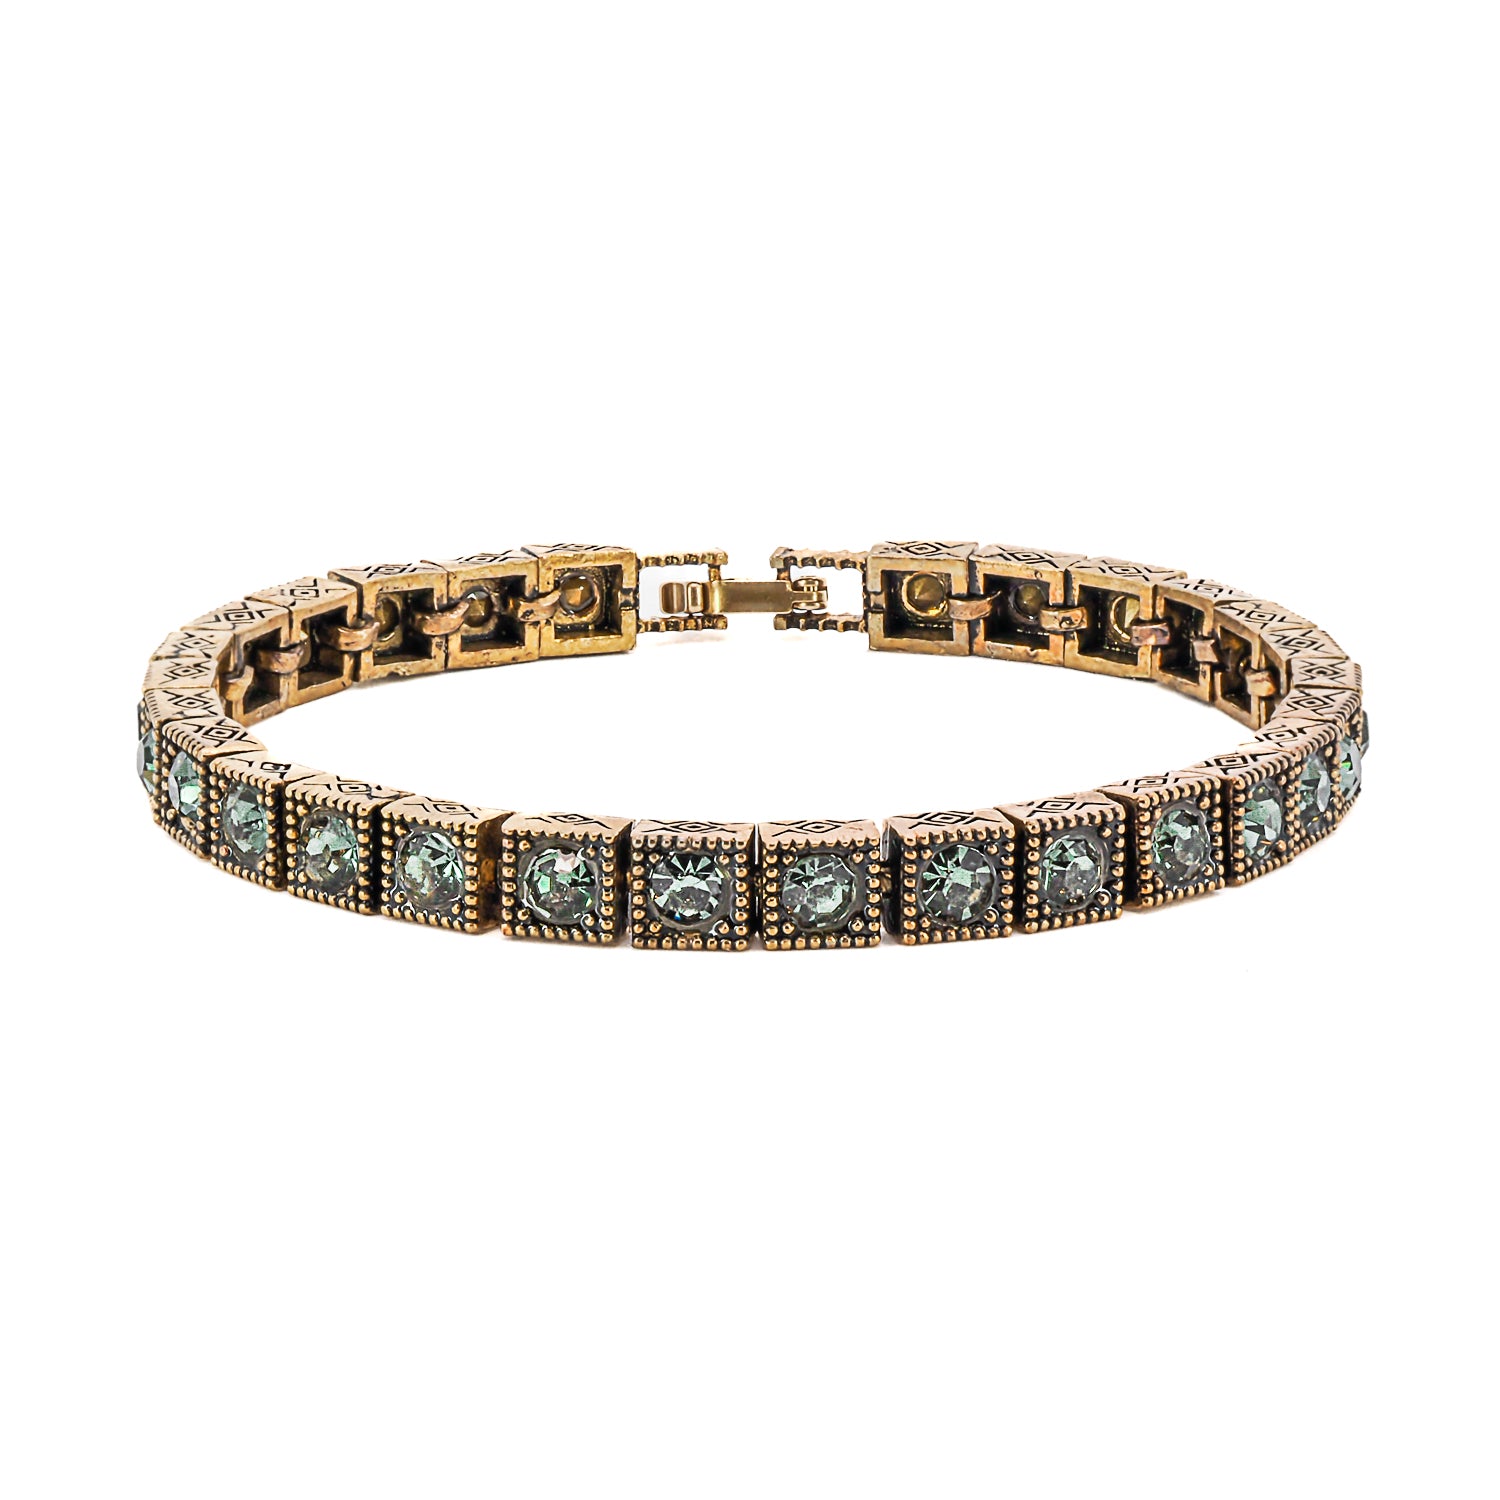 The timeless beauty of the Tennis Bracelet with green Swarovski crystals.